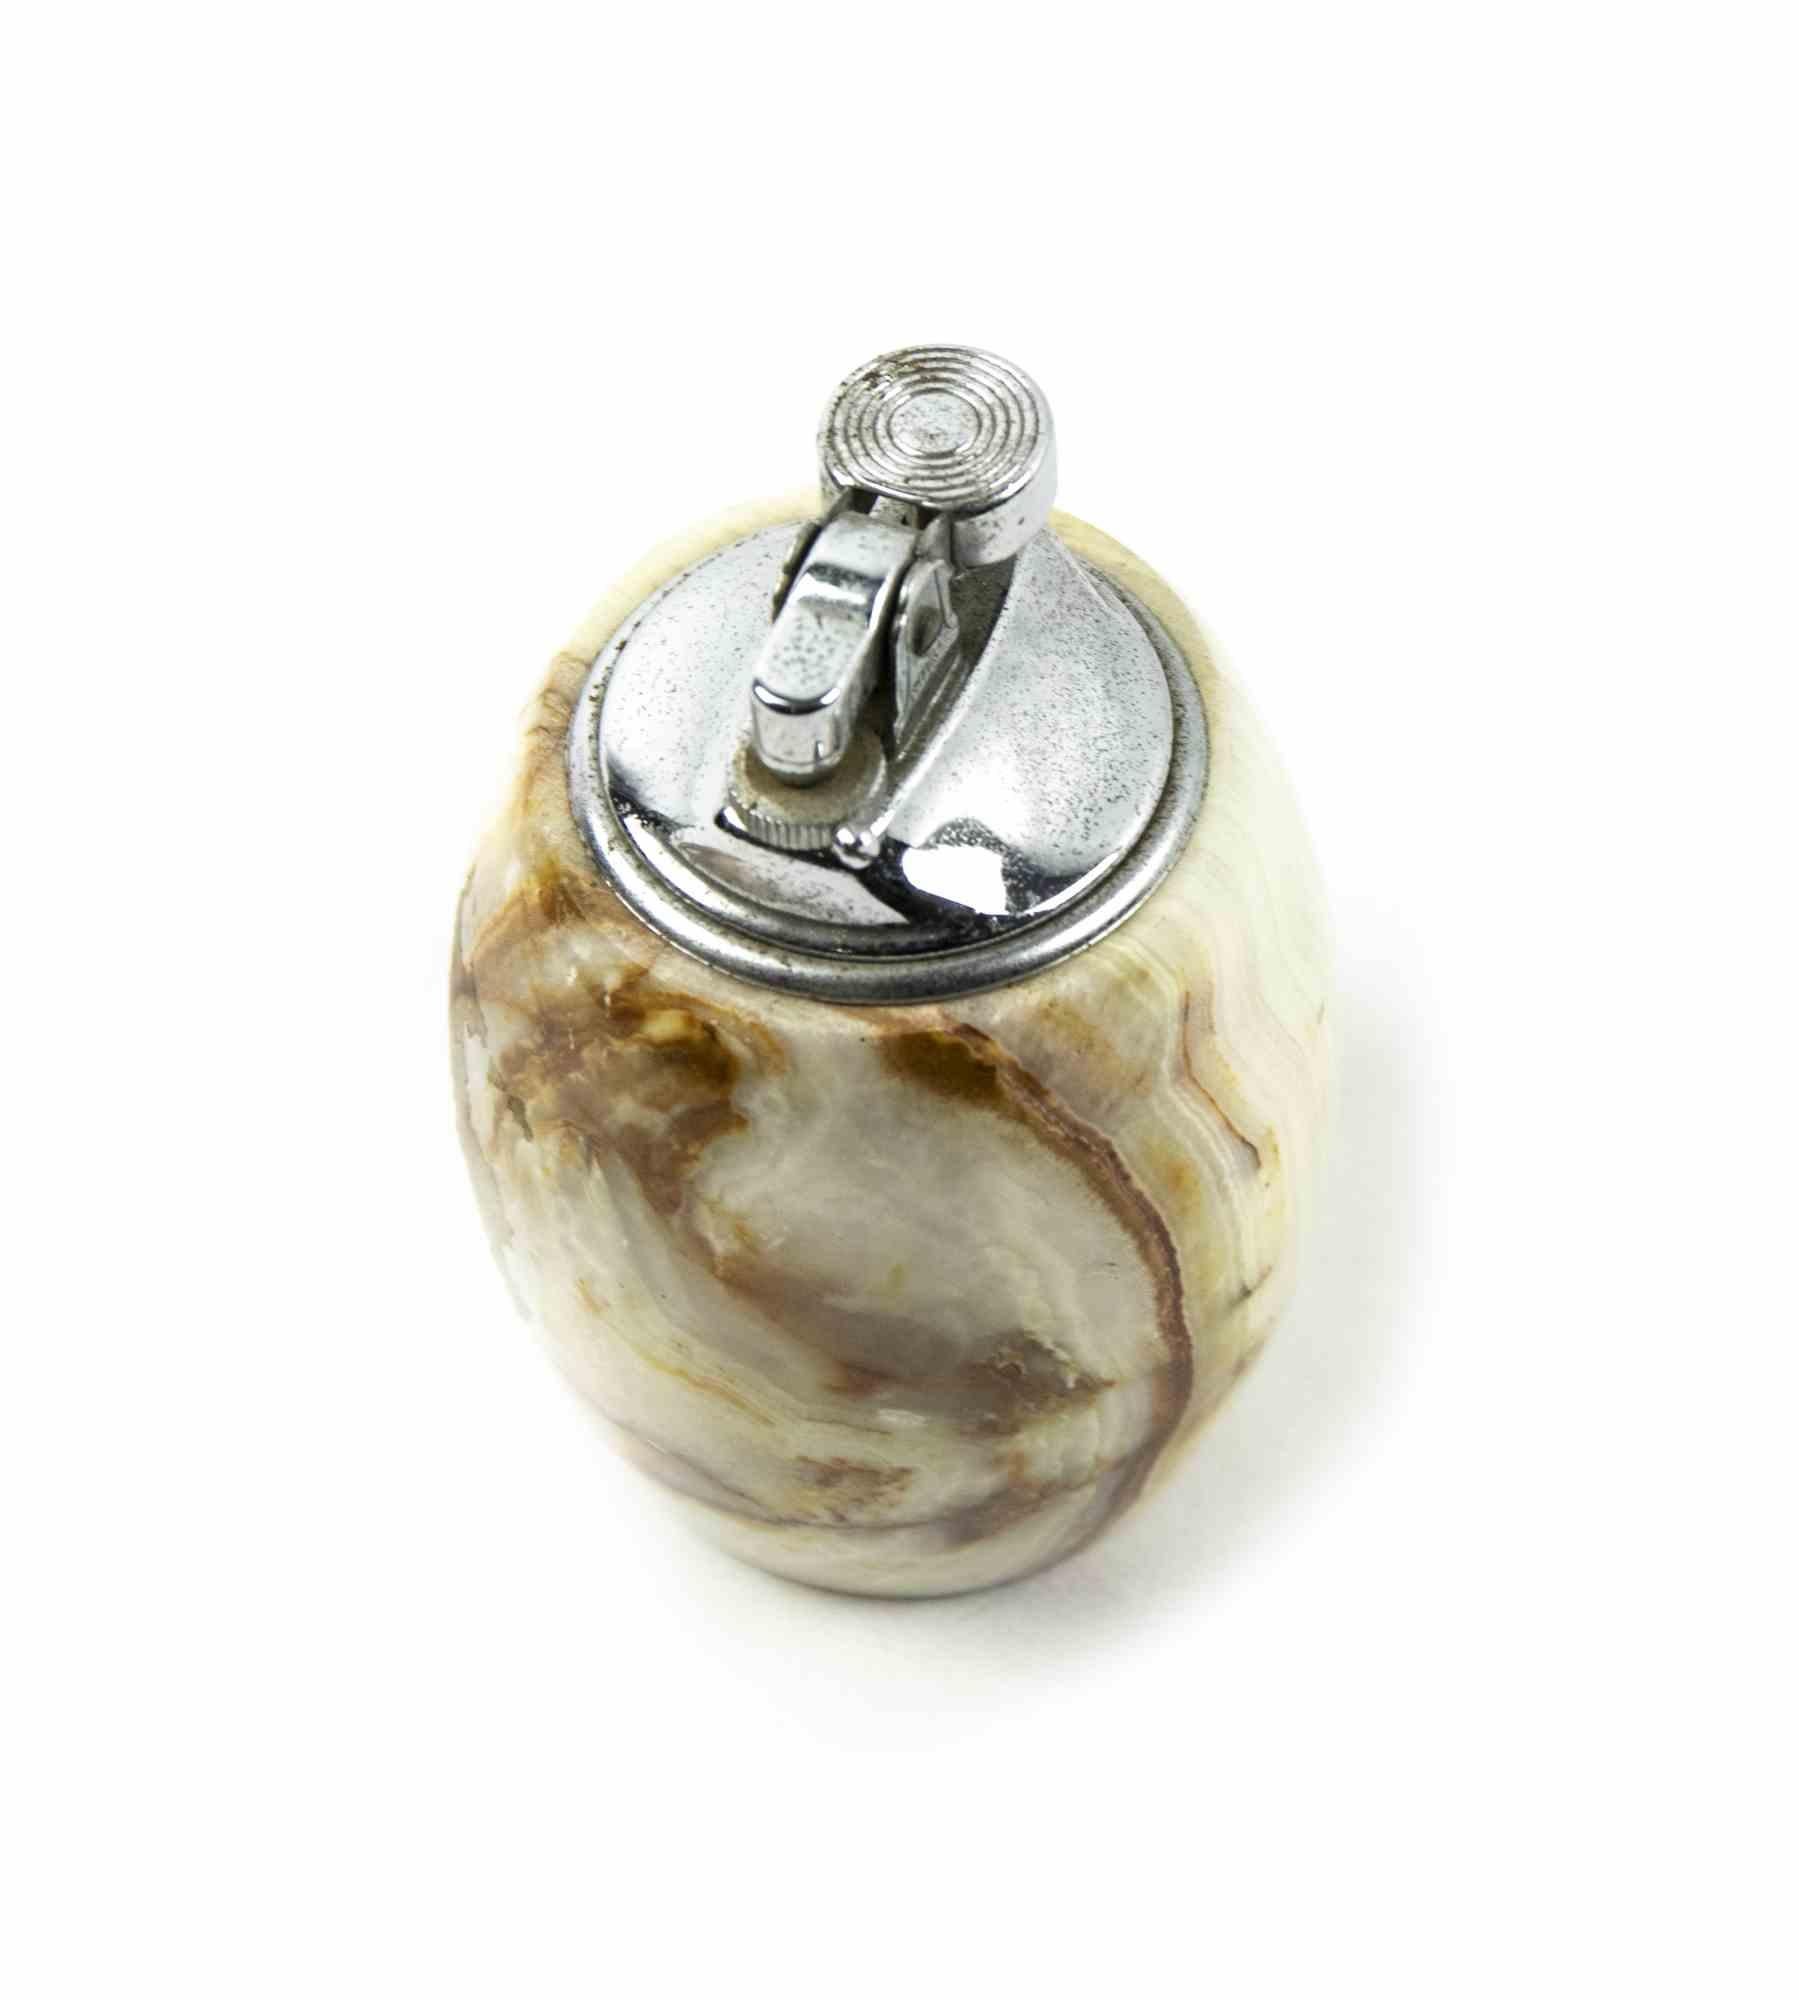 Vintage marble lighter is an original decorative object realized in the 1970s.

Original marble and metal.

Made in Italy.

Dimensions: 13 x 18 cm. 

Good Conditions.